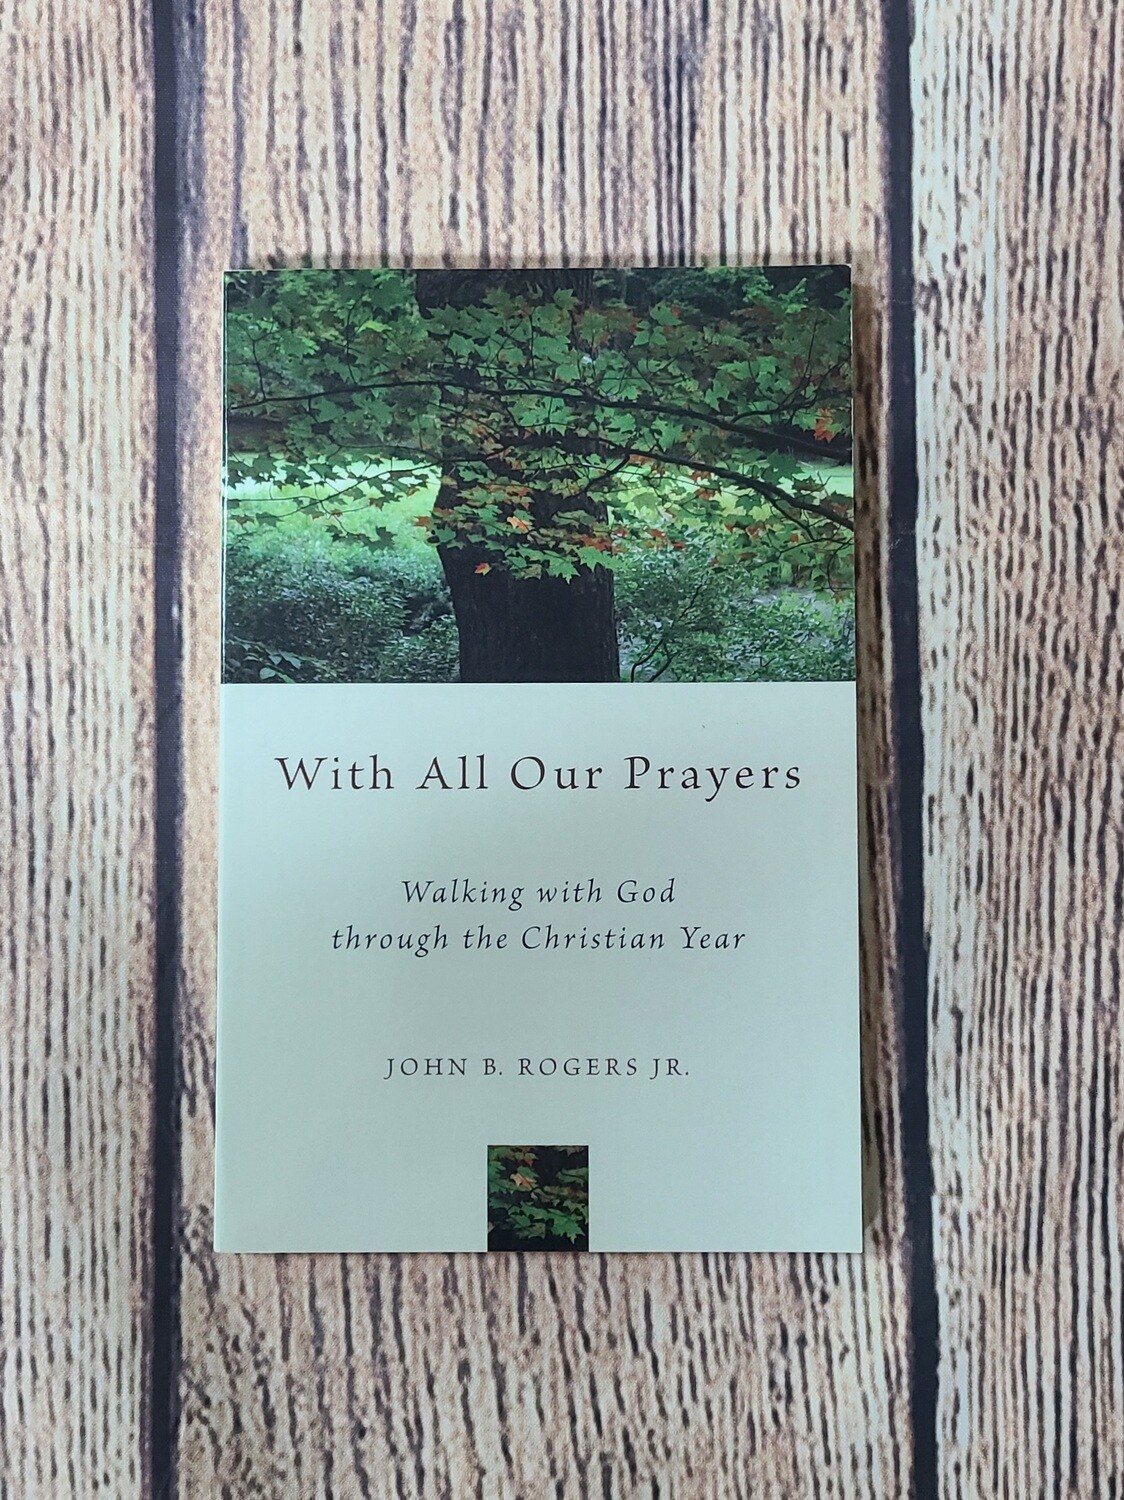 With all Our Prayers: Walking with God through the Christian Year by John B. Rogers Jr.